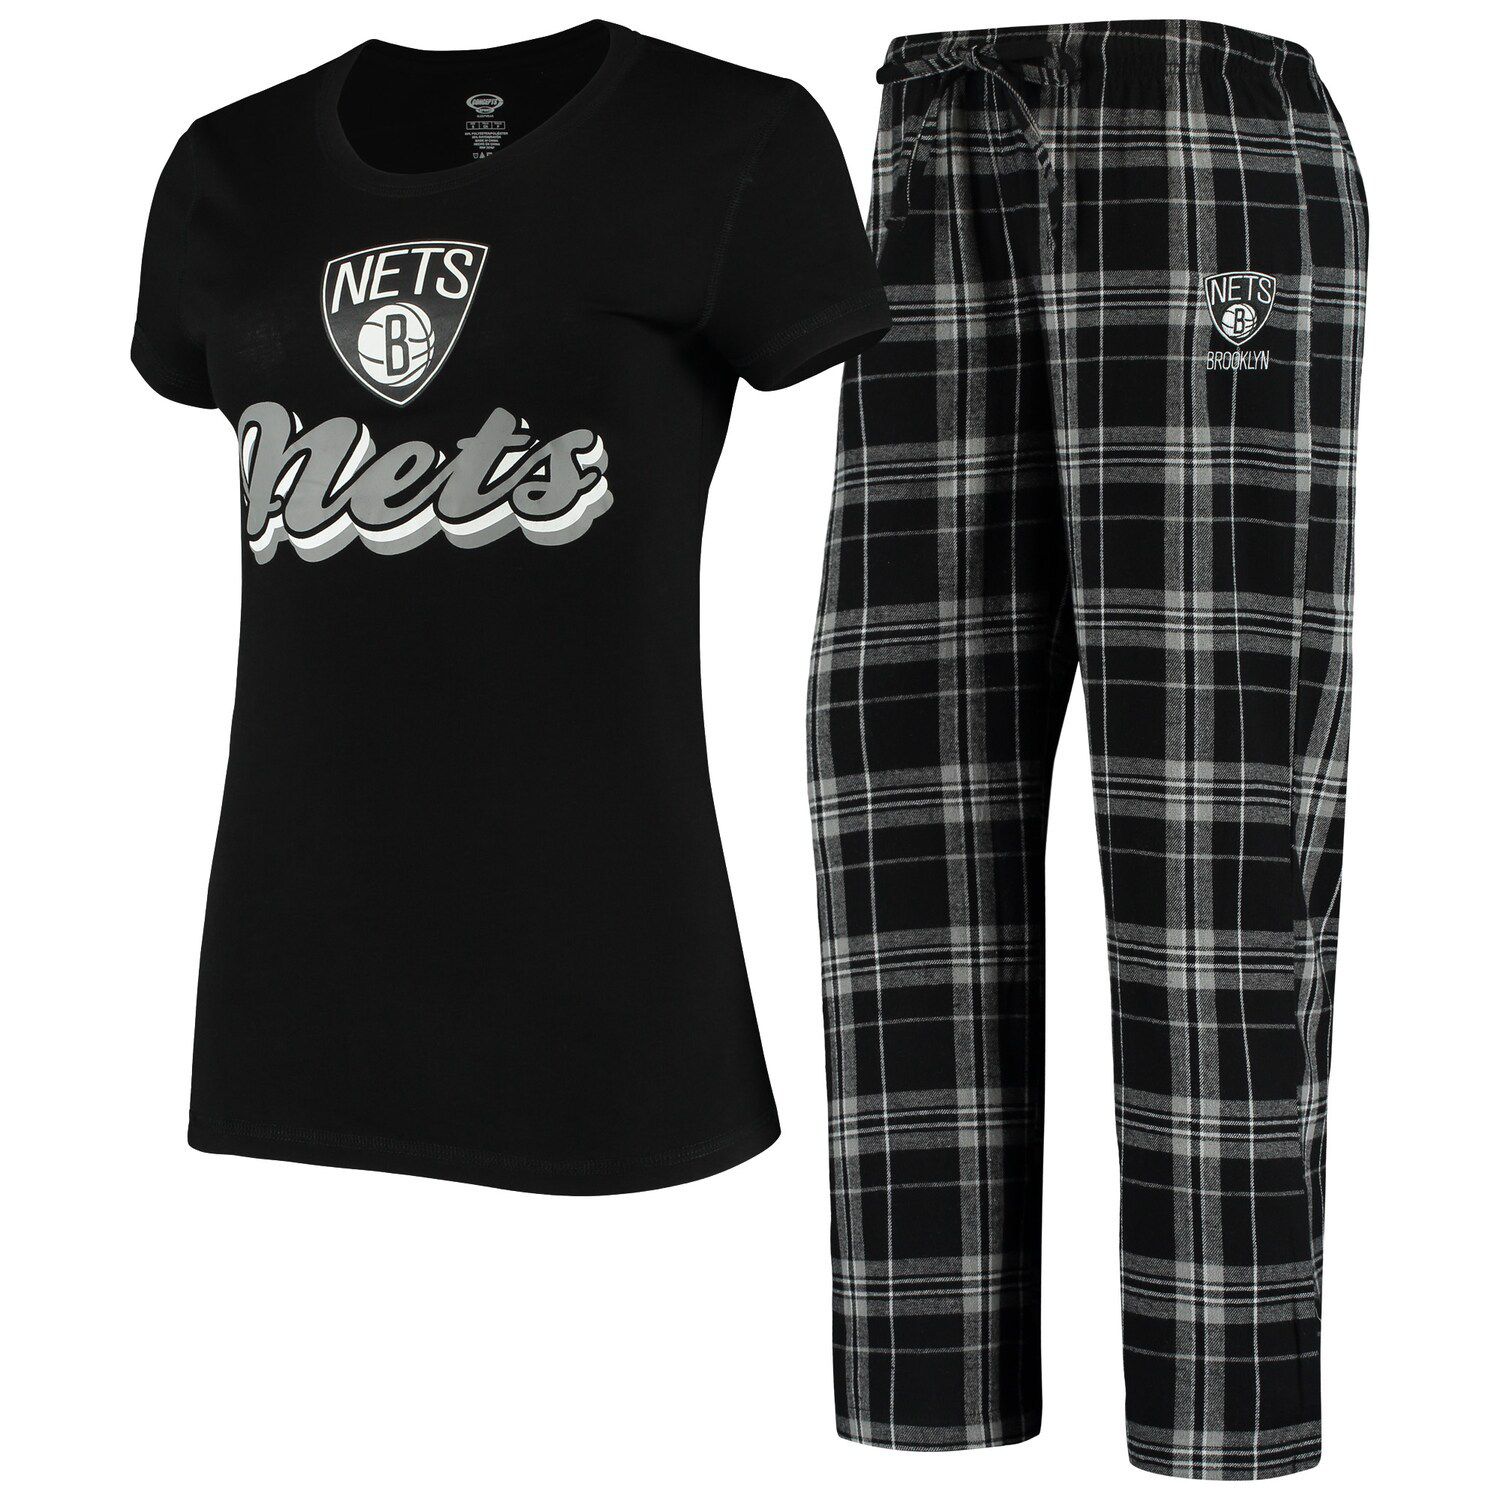 Image for Unbranded Women's Concepts Sport Black/Gray Brooklyn Nets Ethos T-Shirt & Pants Sleep Set at Kohl's.